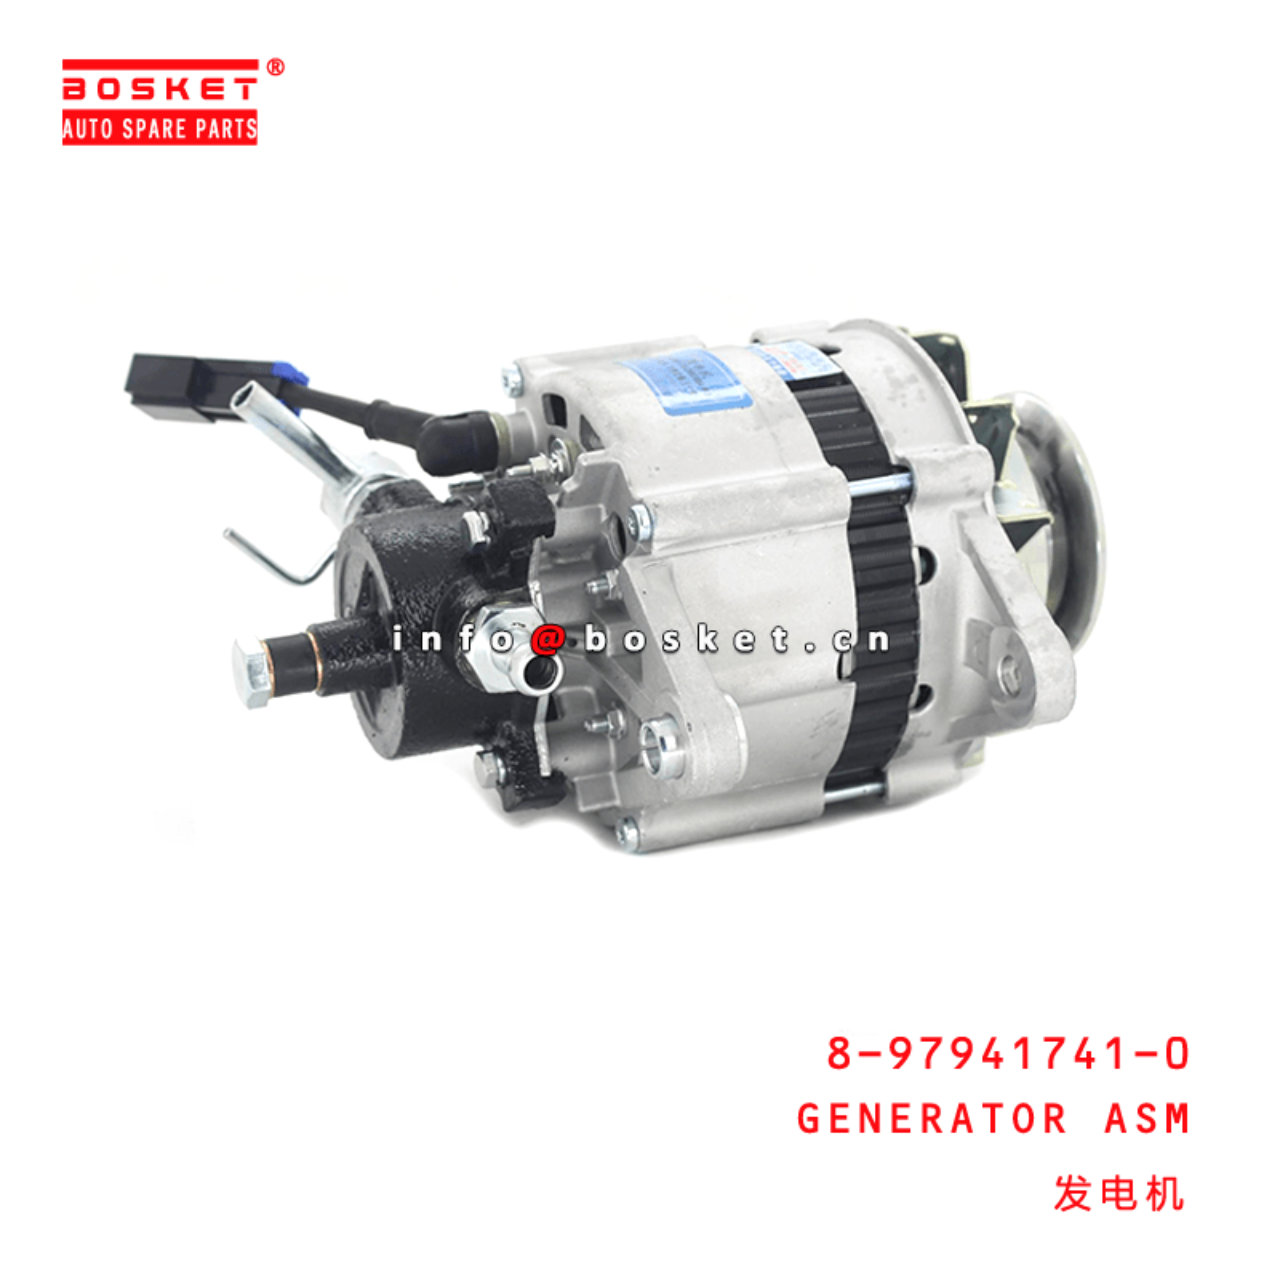 8-97941741-0 Generator Assembly 8979417410 Suitable for ISUZU 